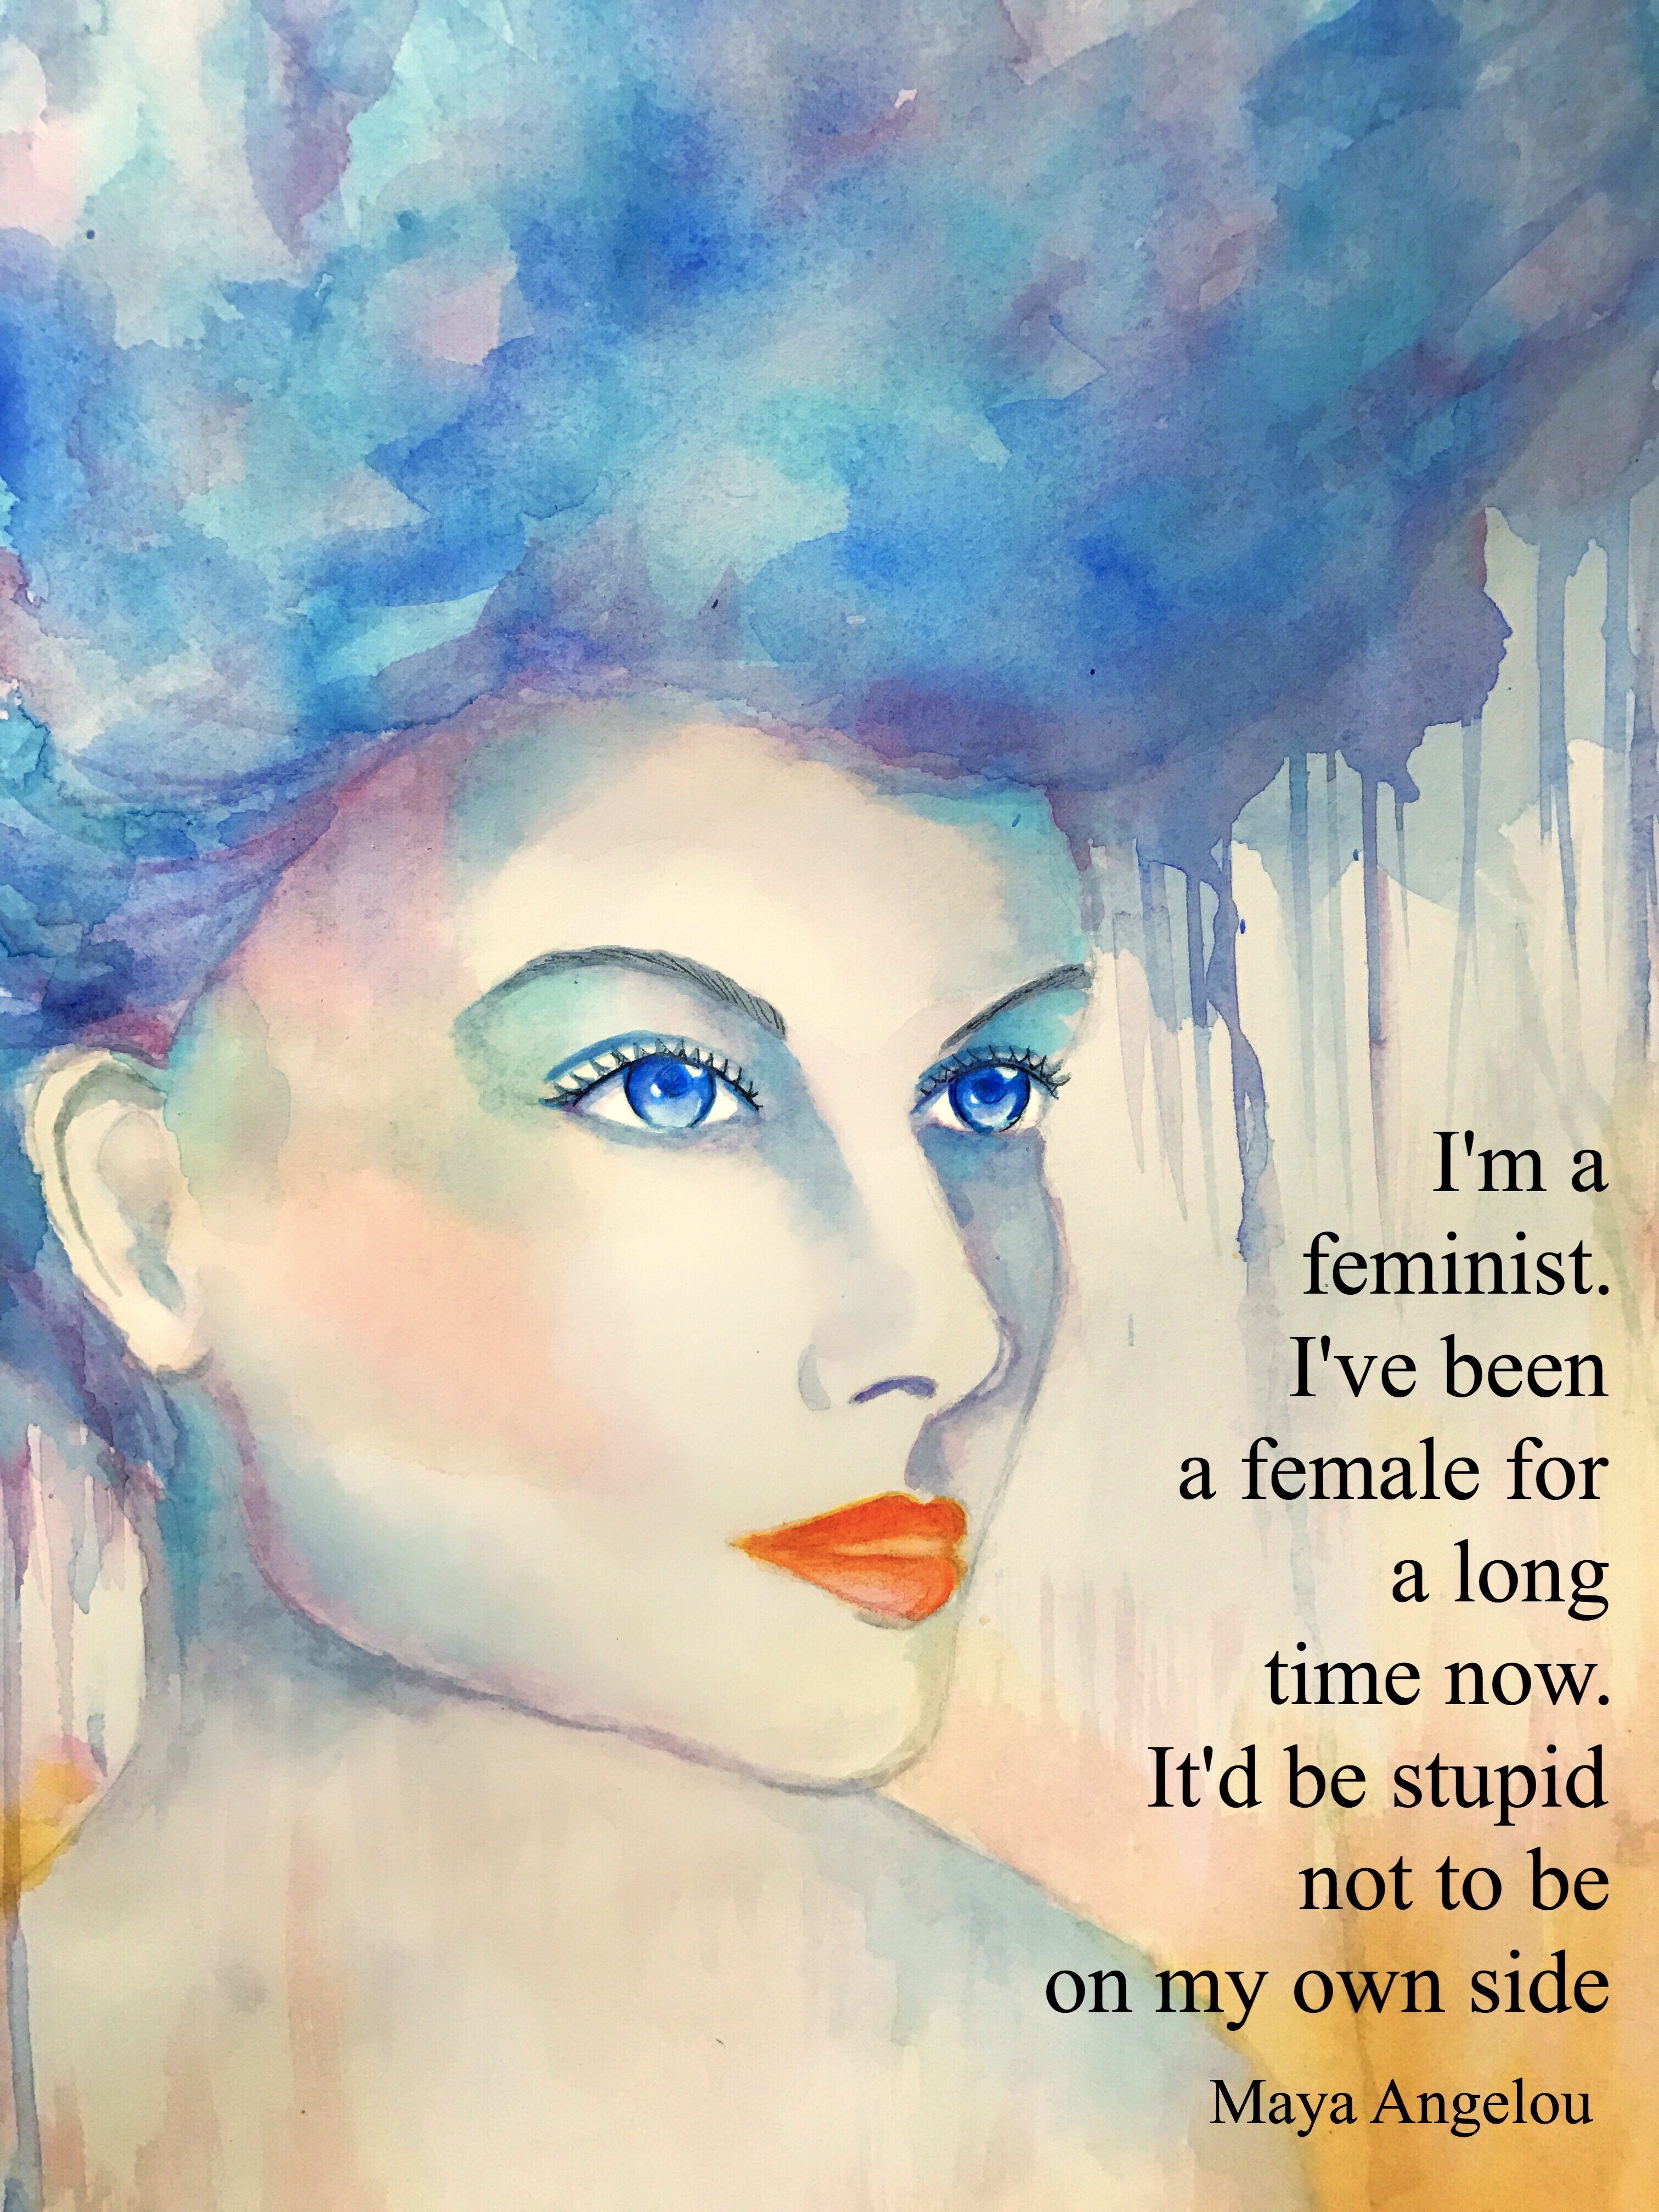 wet on painting feminism and art culture